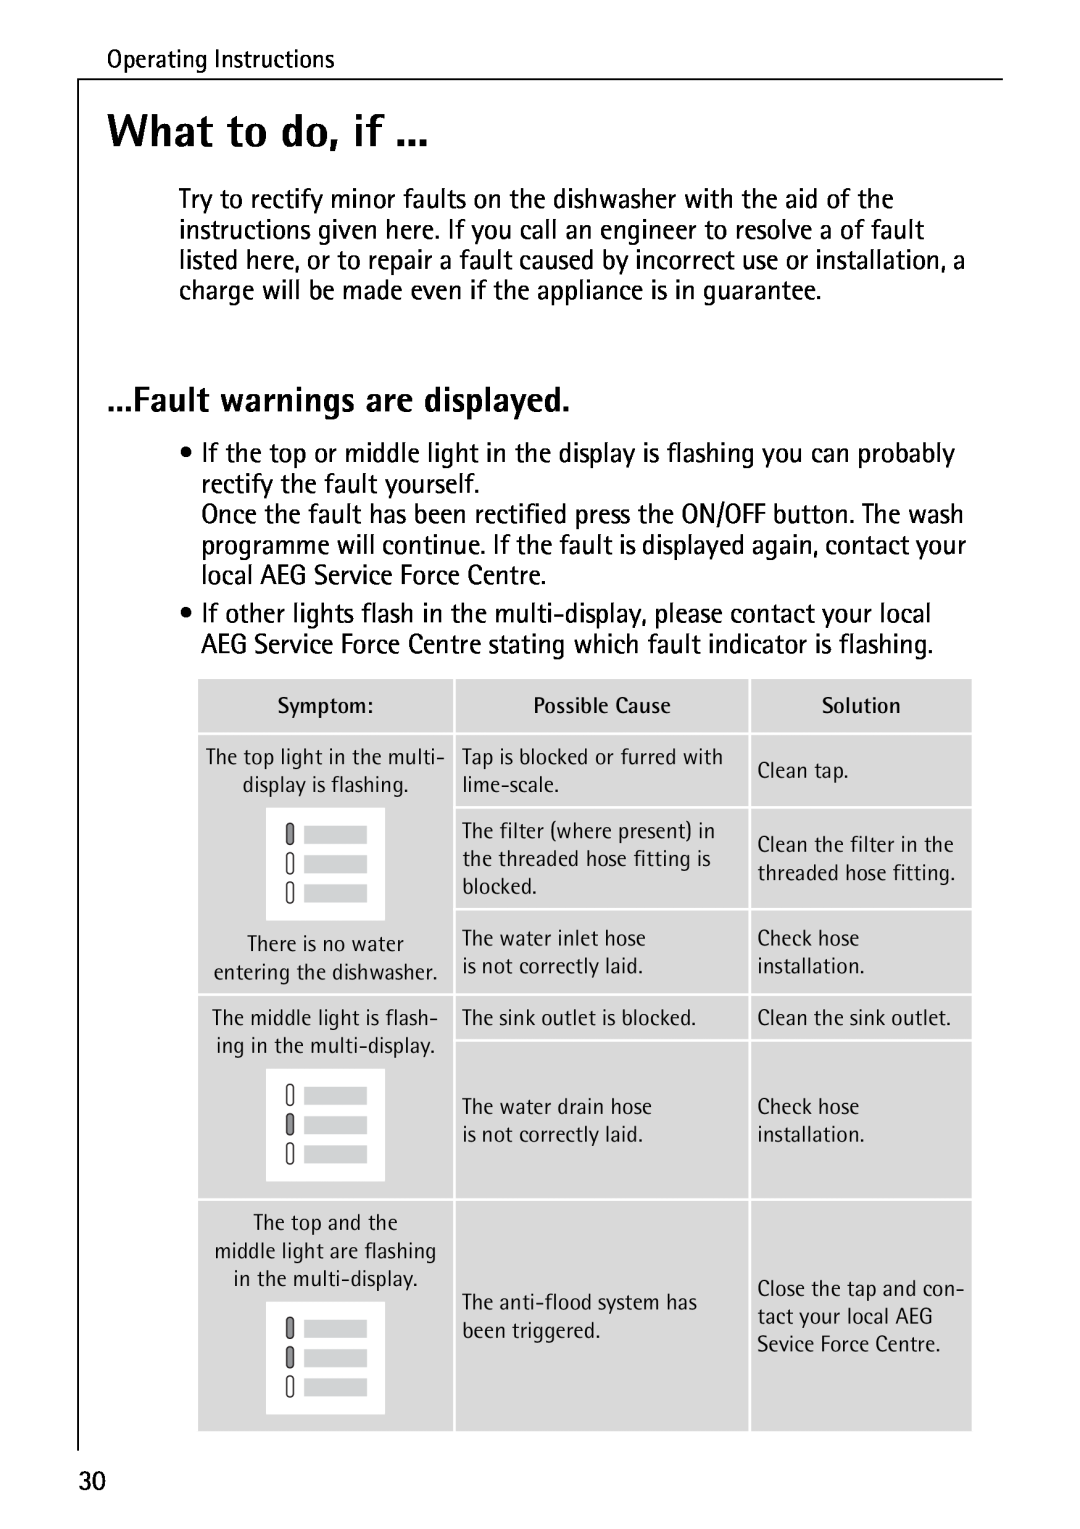 Electrolux 50610 manual What to do, if, Fault warnings are displayed 